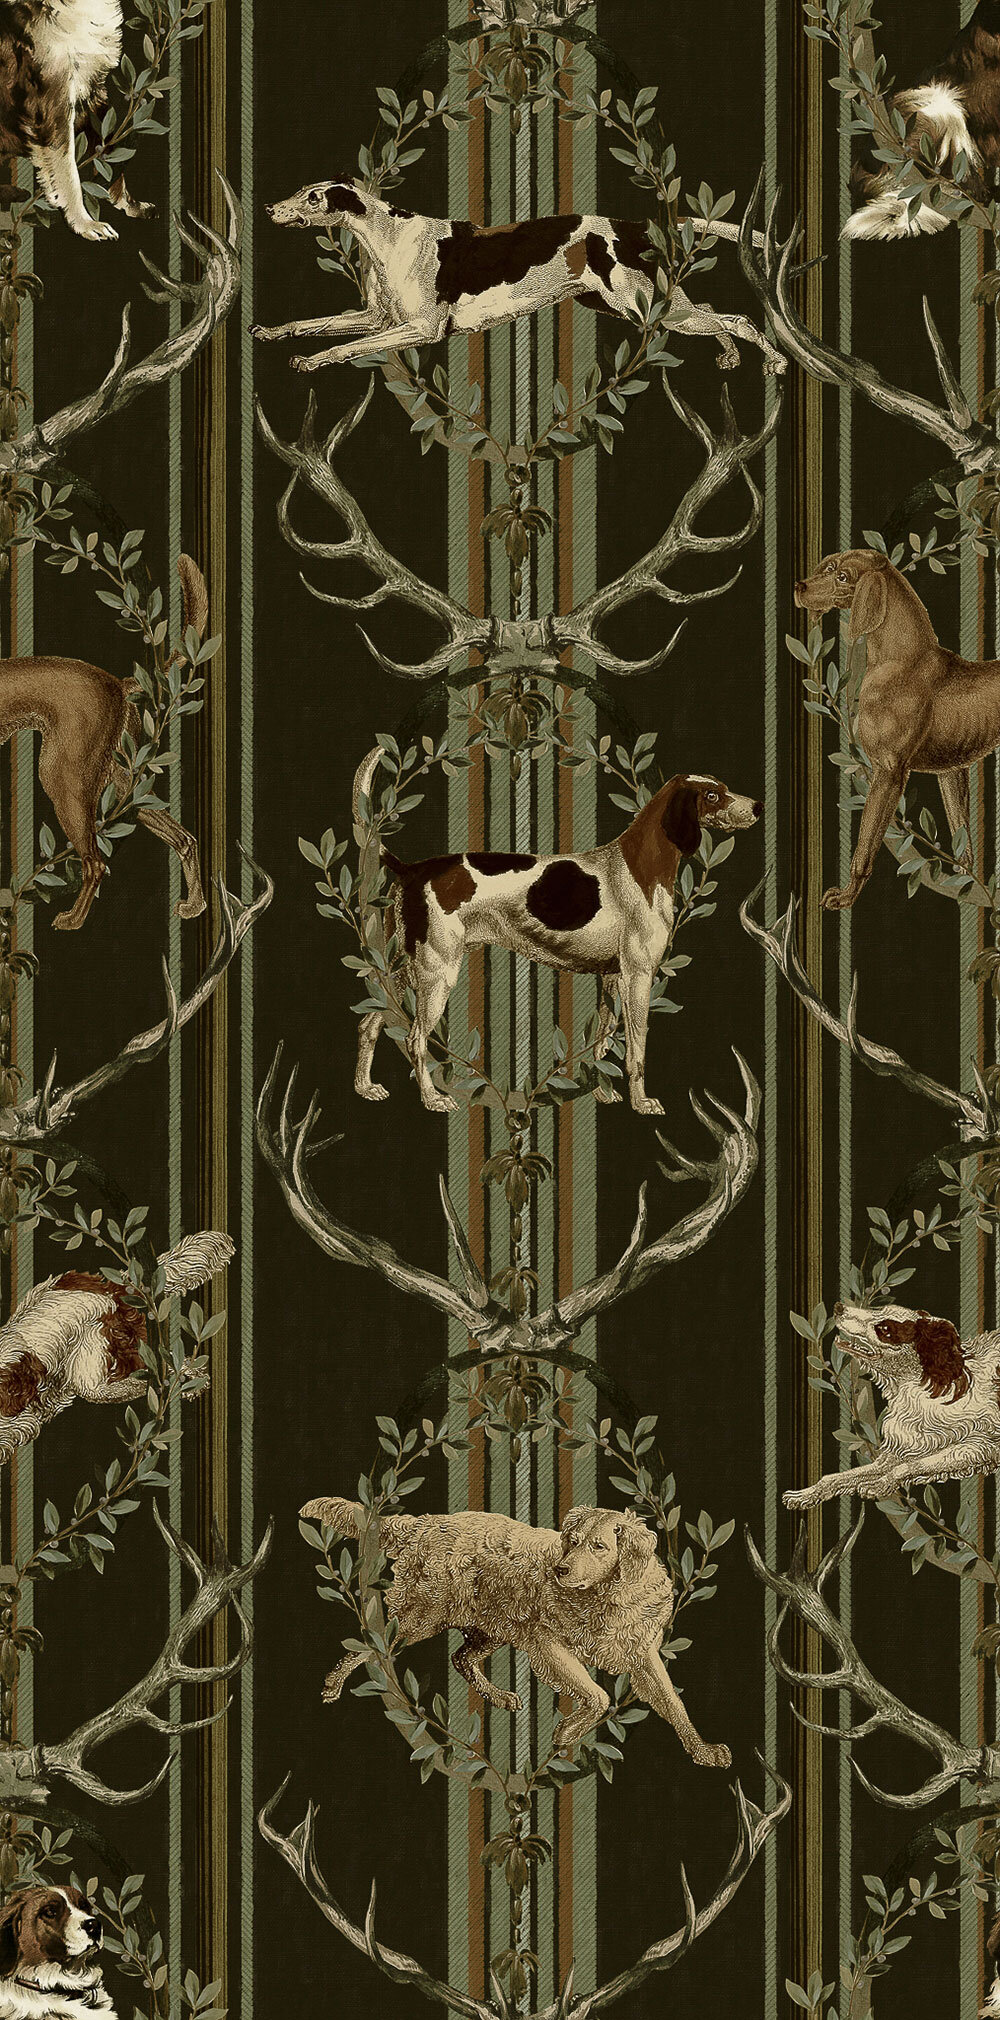 Mountain Dogs Wallpaper Mural - Peat Black - by Mind the Gap